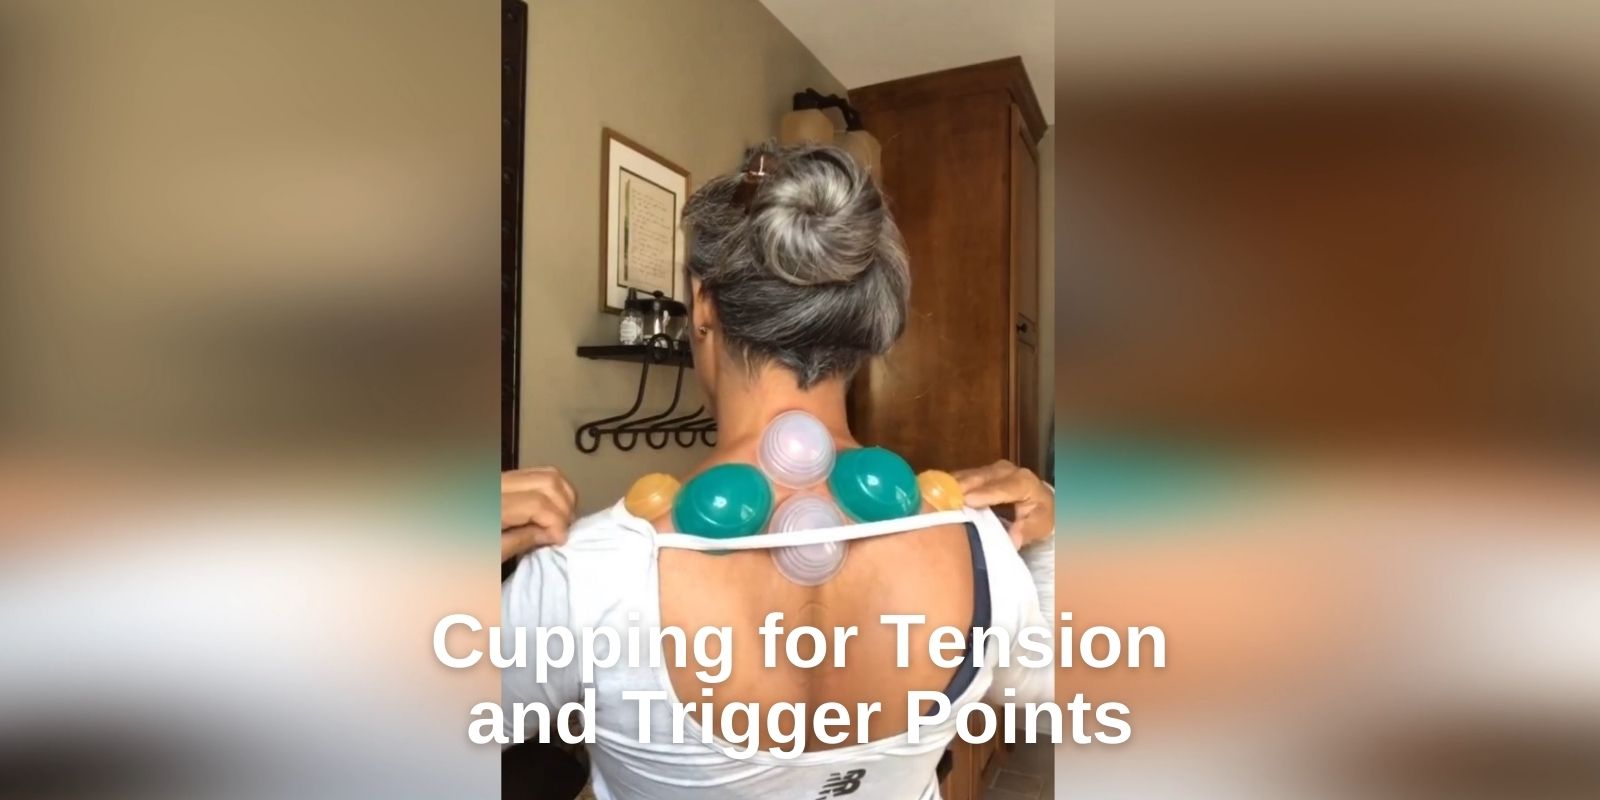 Cupping for the Neck Pain and Shoulder Tension